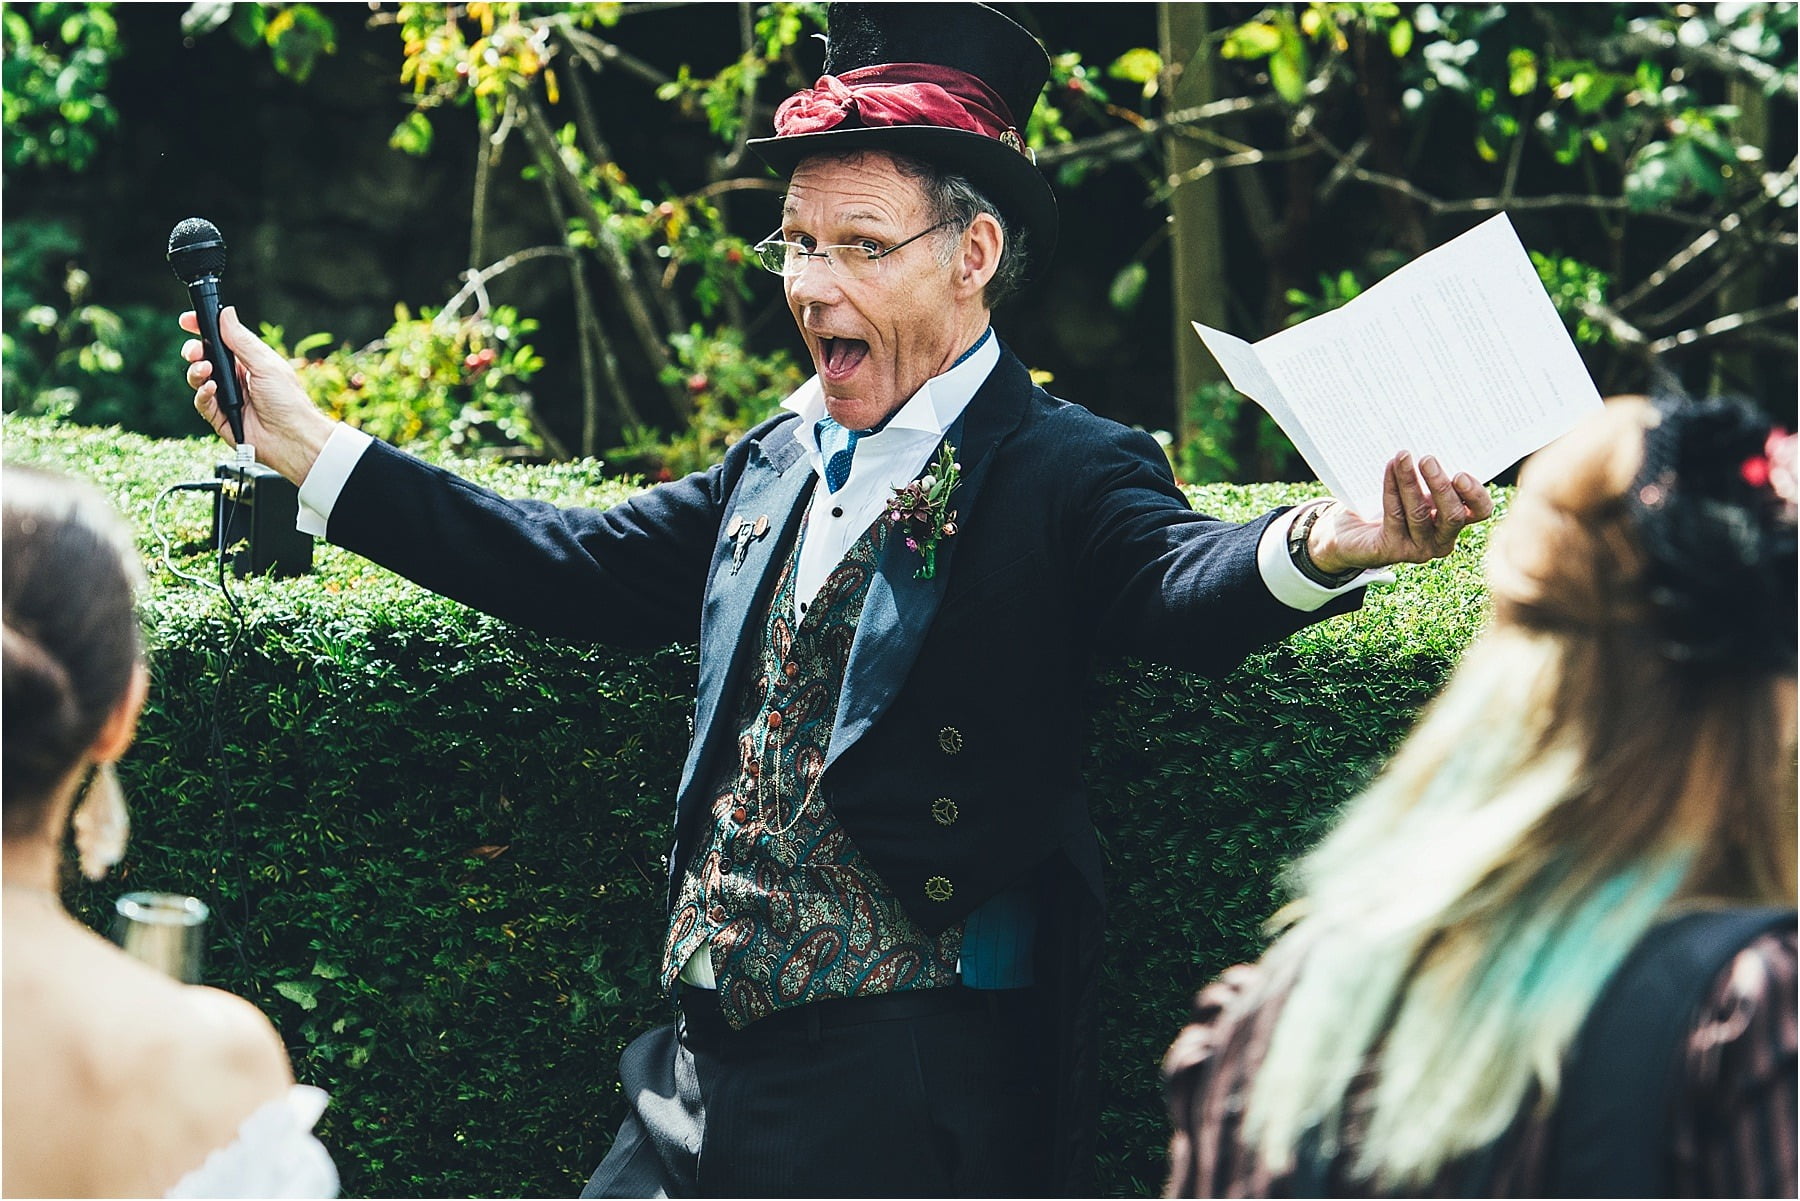 Steampunk wedding at nettlestead place in Kent